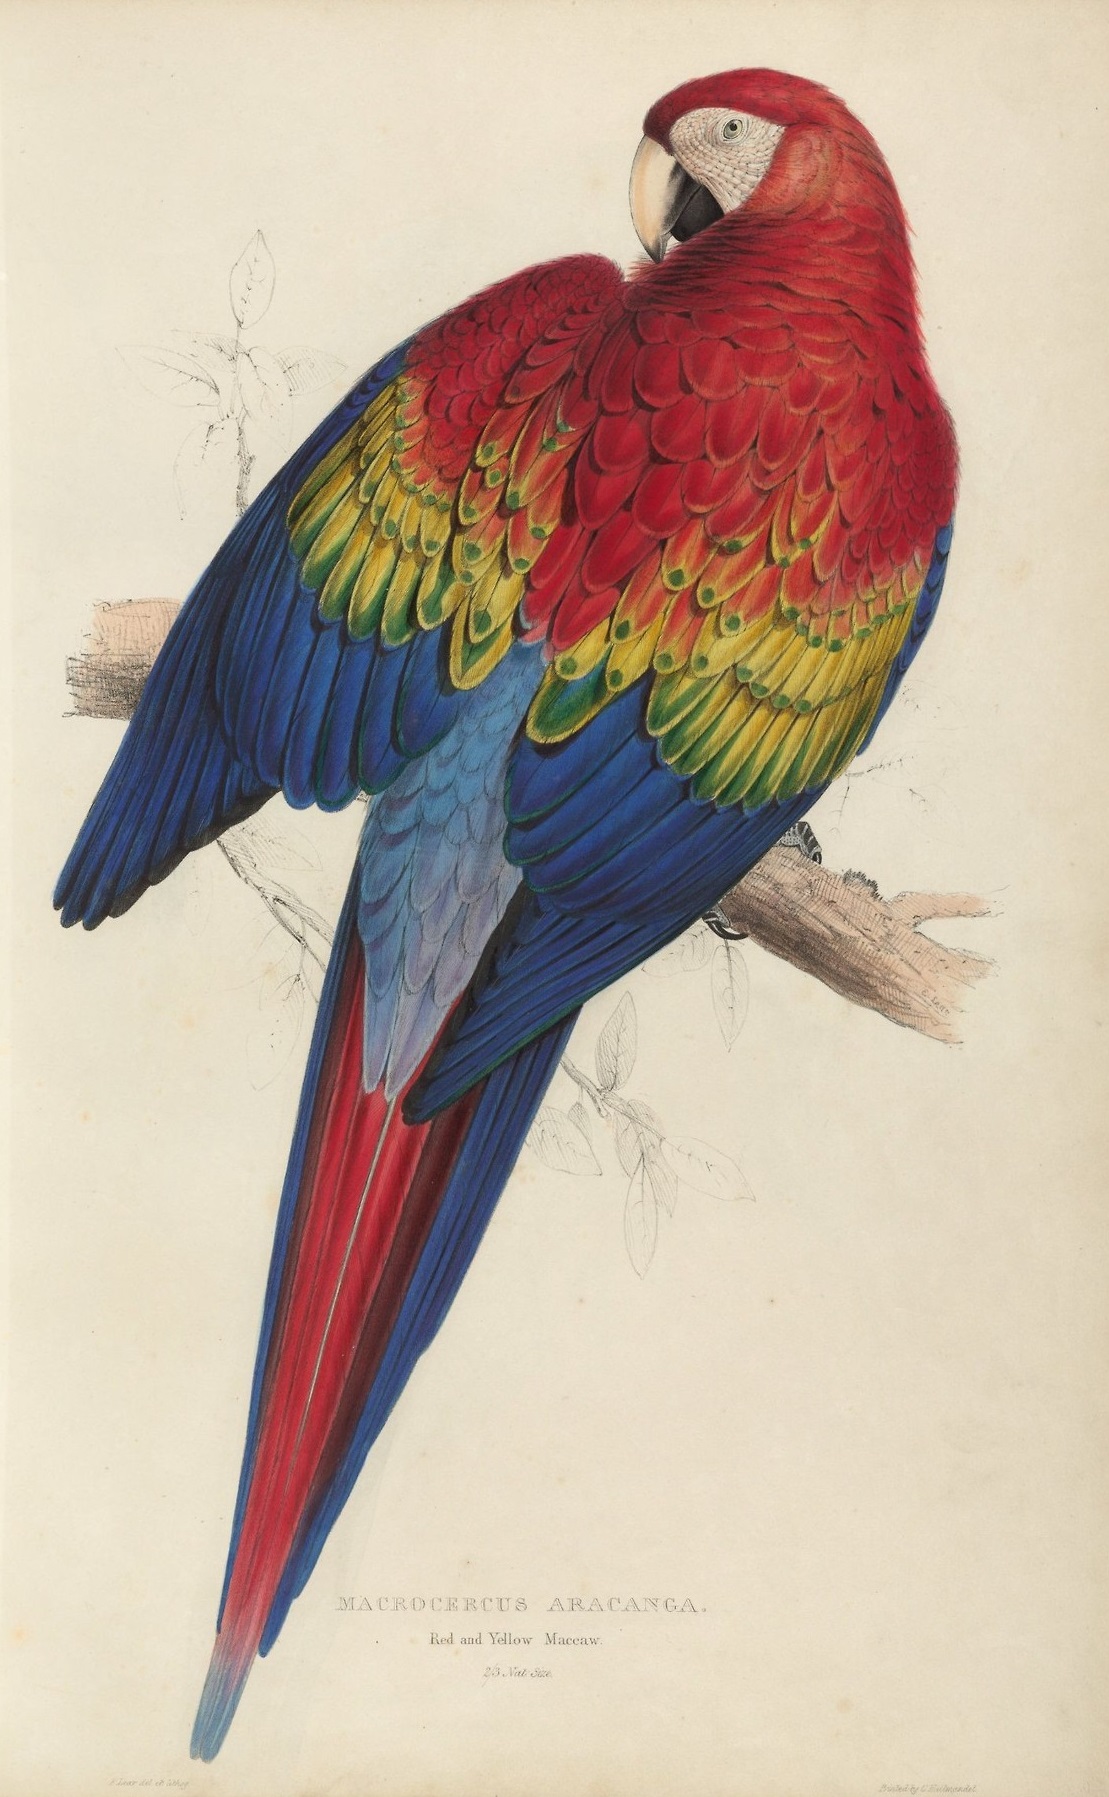 An illustration of a parrot